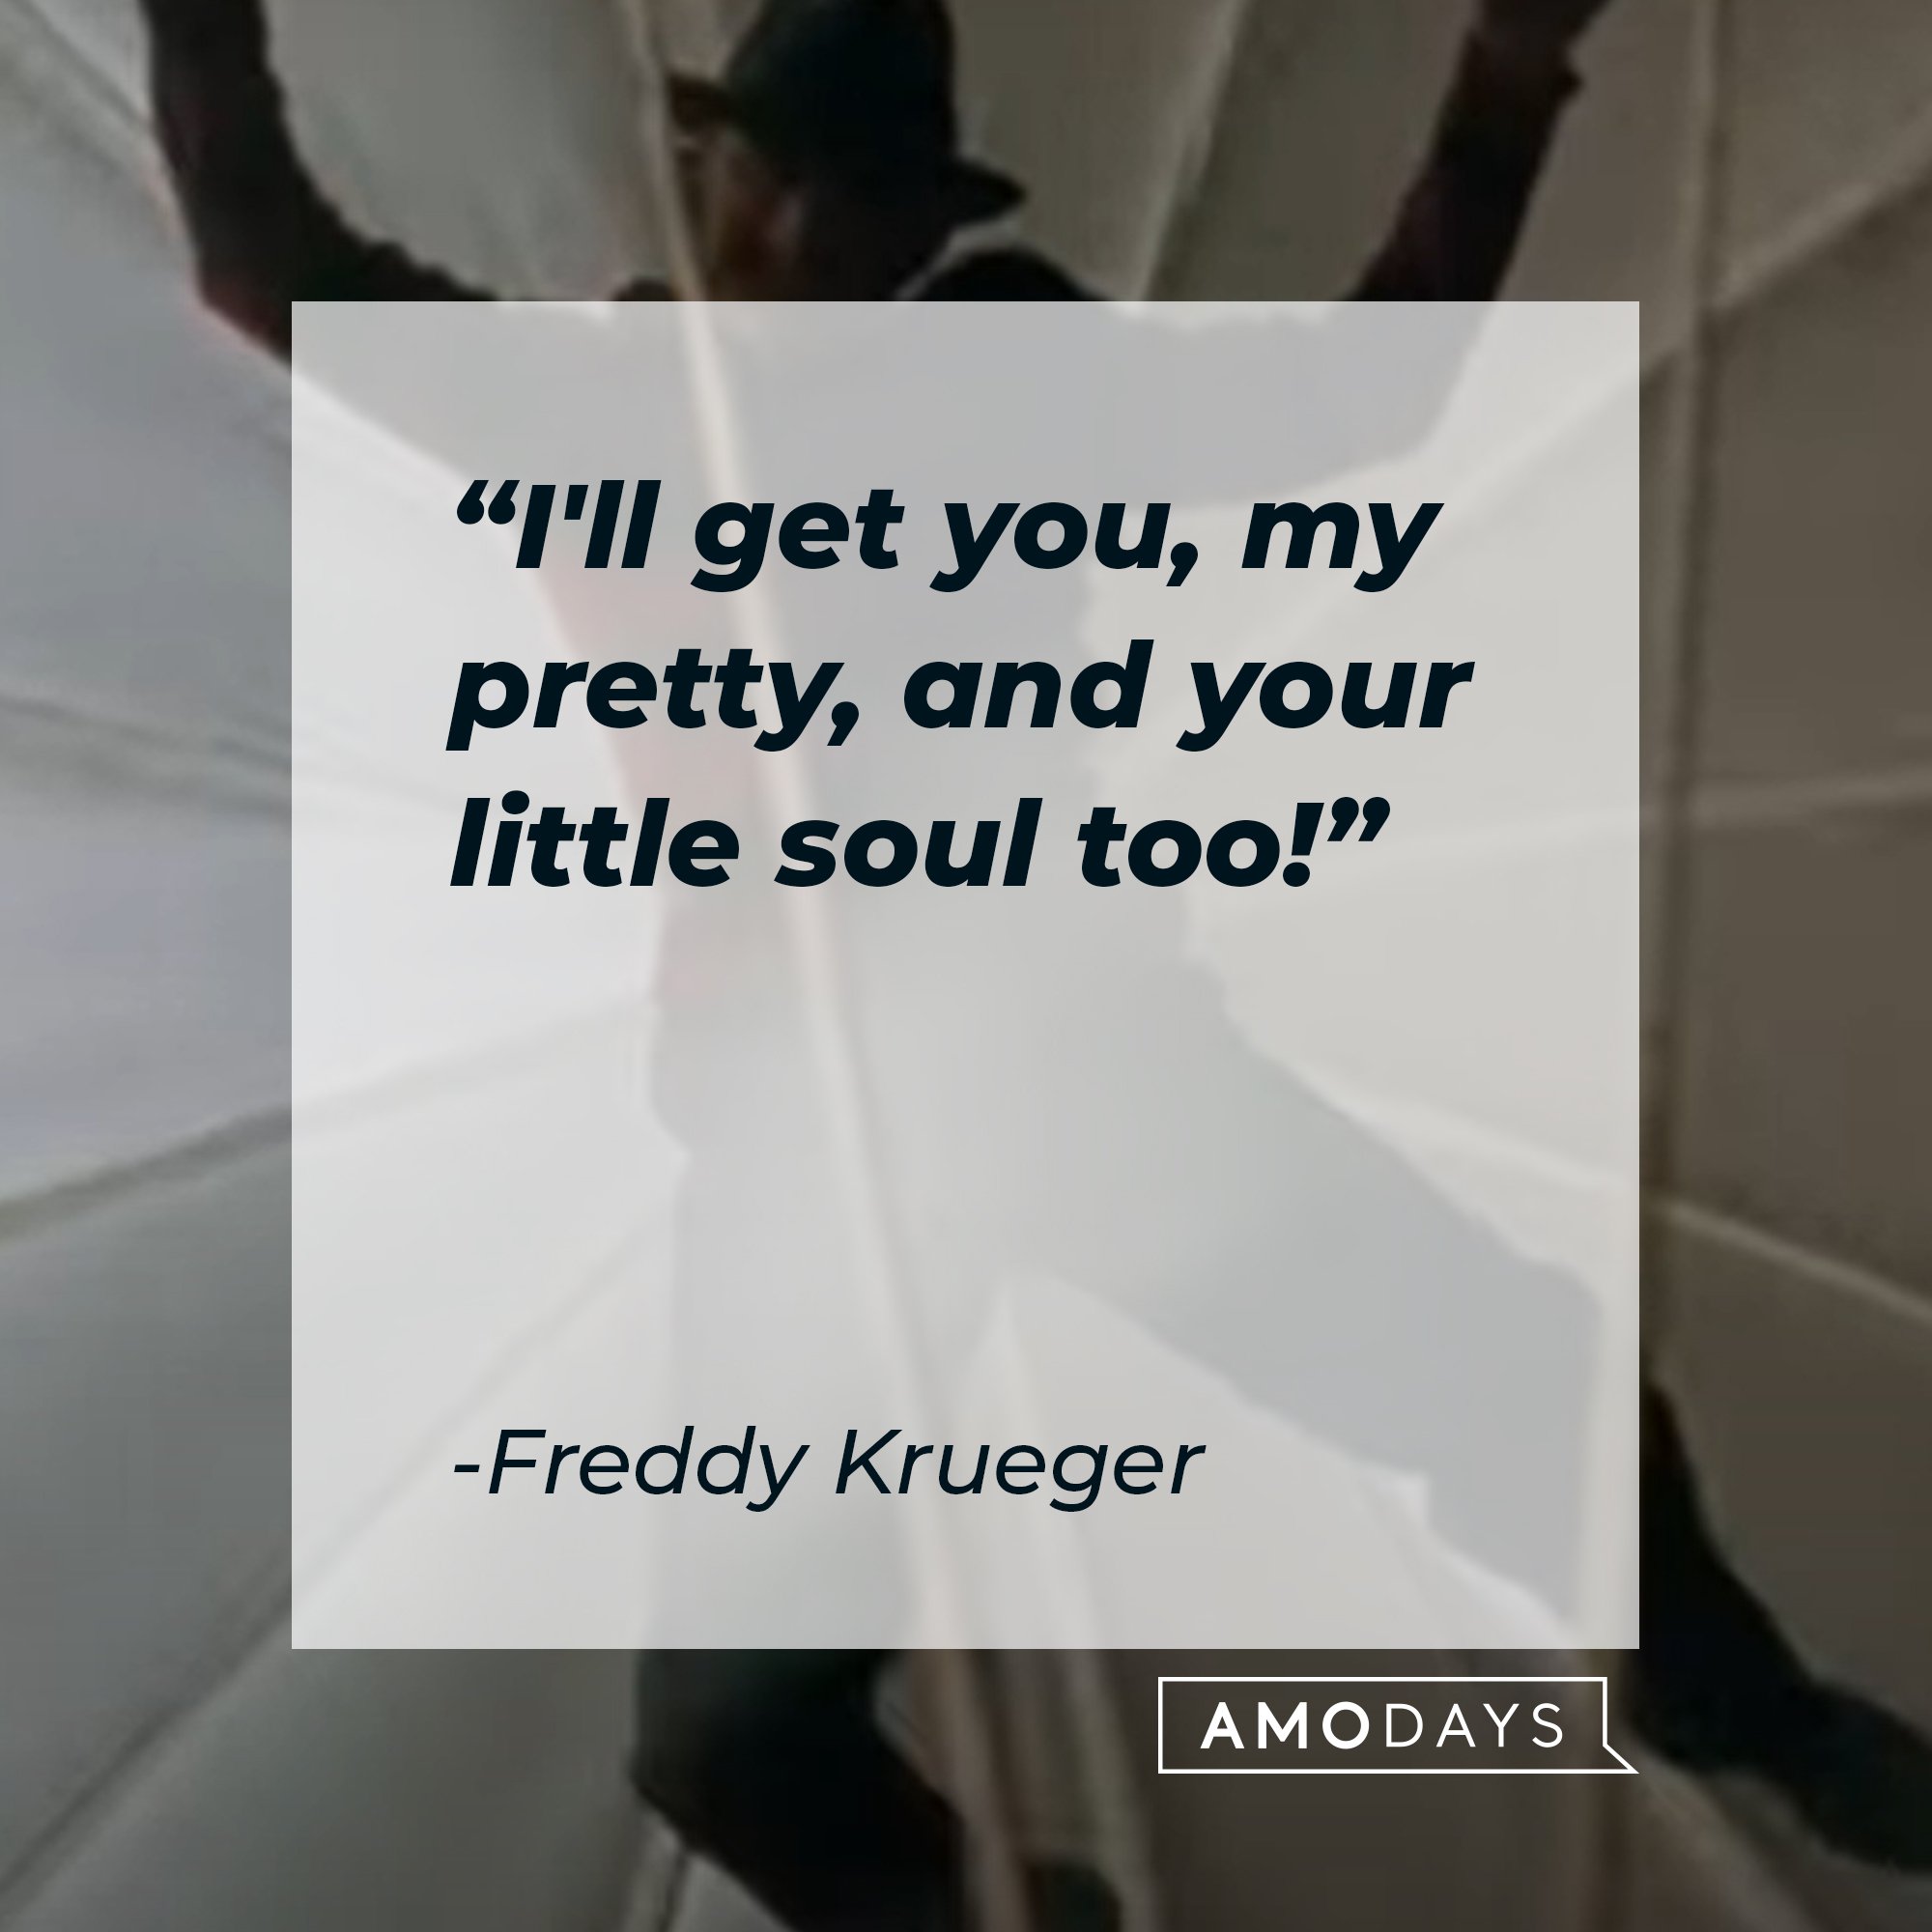 Freddy Krueger’s quote: "I'll get you, my pretty, and your little soul too!" | Image: AmoDays